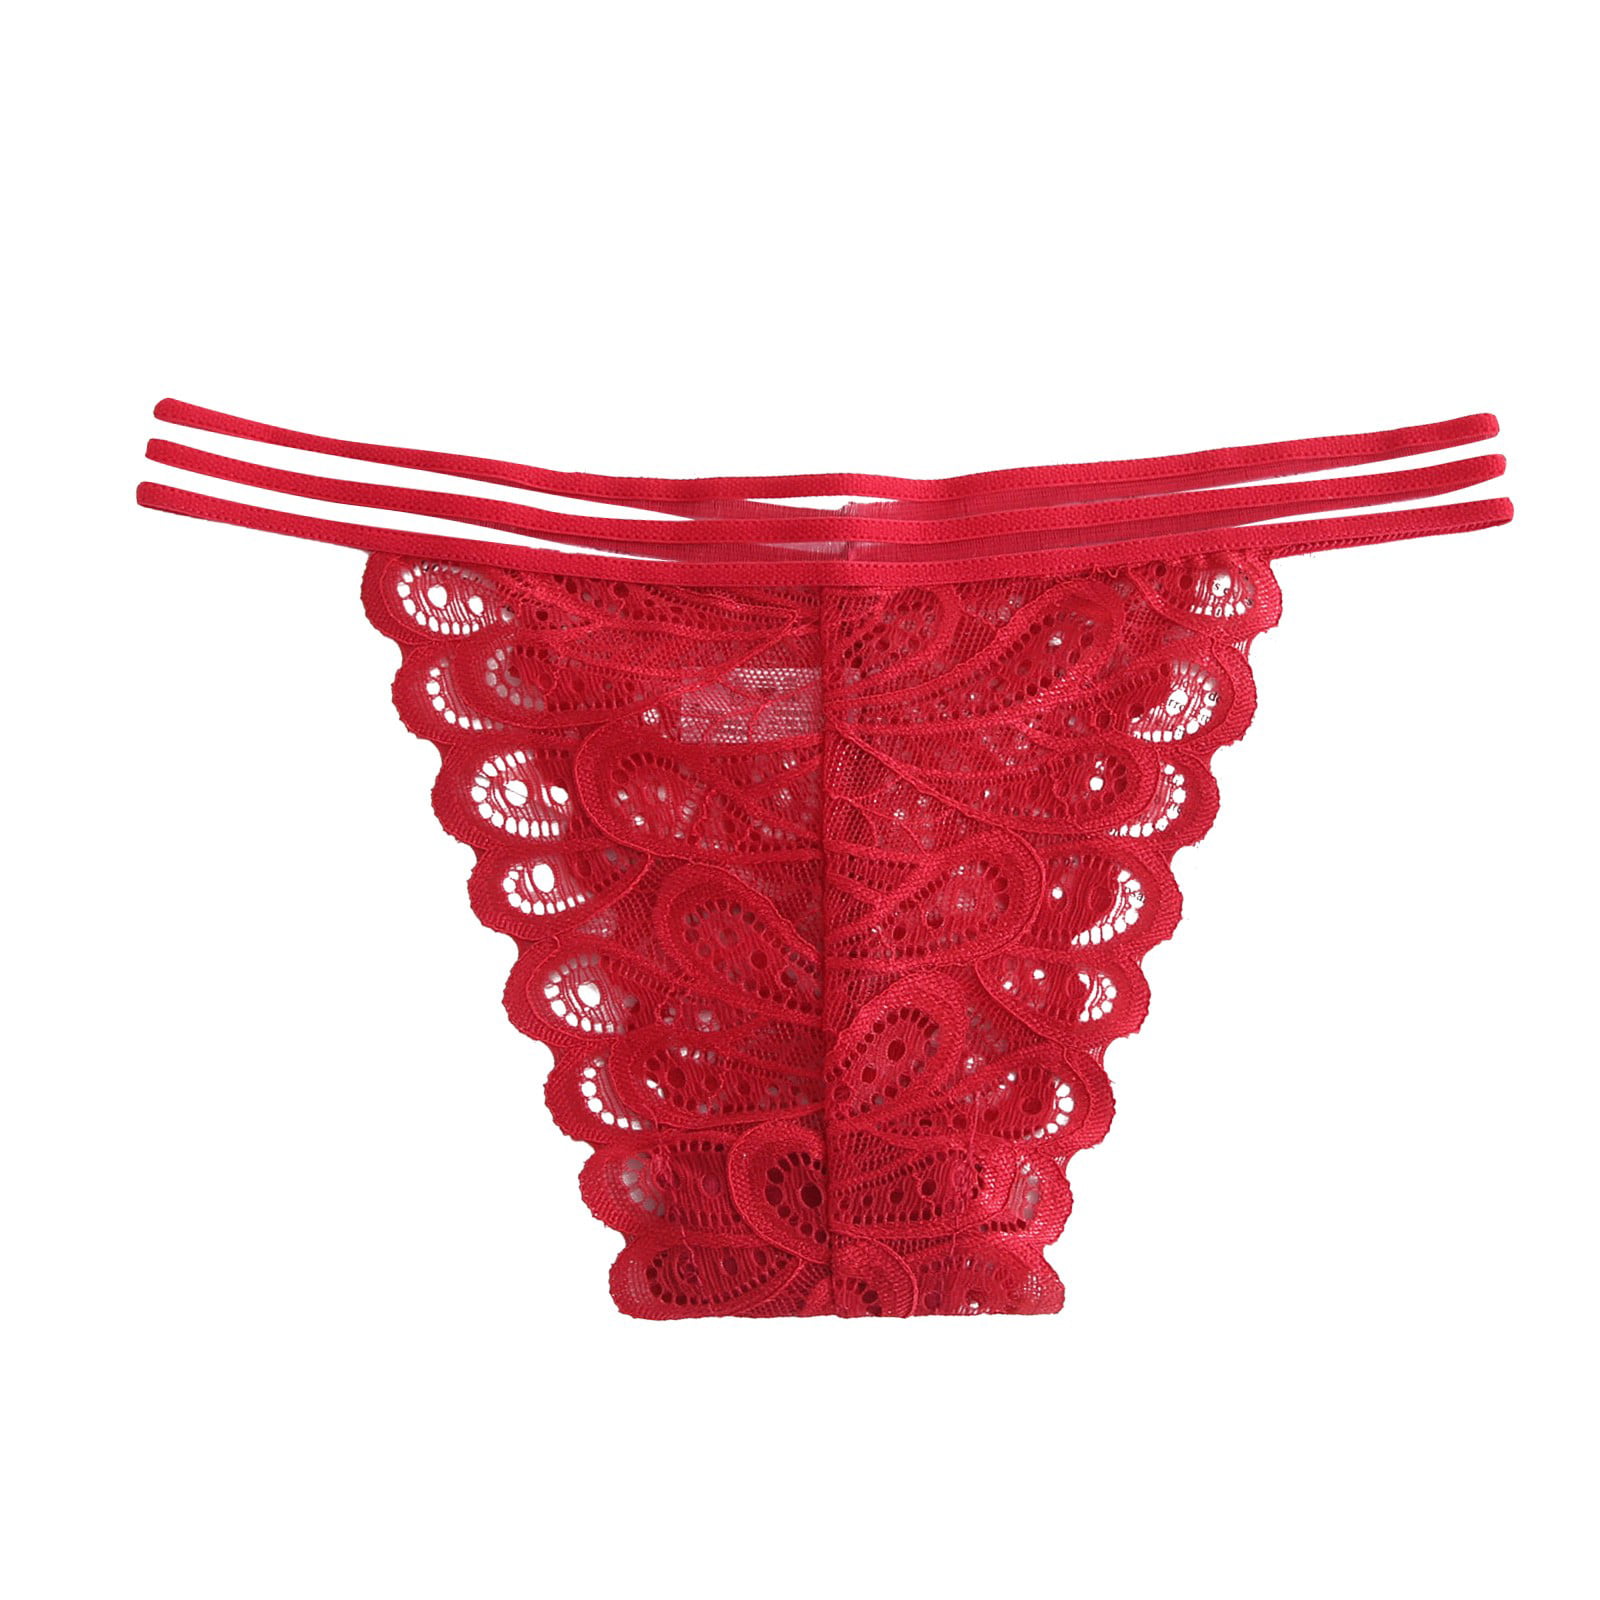 Zuwimk G String Thongs For Women,Sport Thong Panties Women Low Rise No Show  Bonded Breathable Underwear Red,One Size